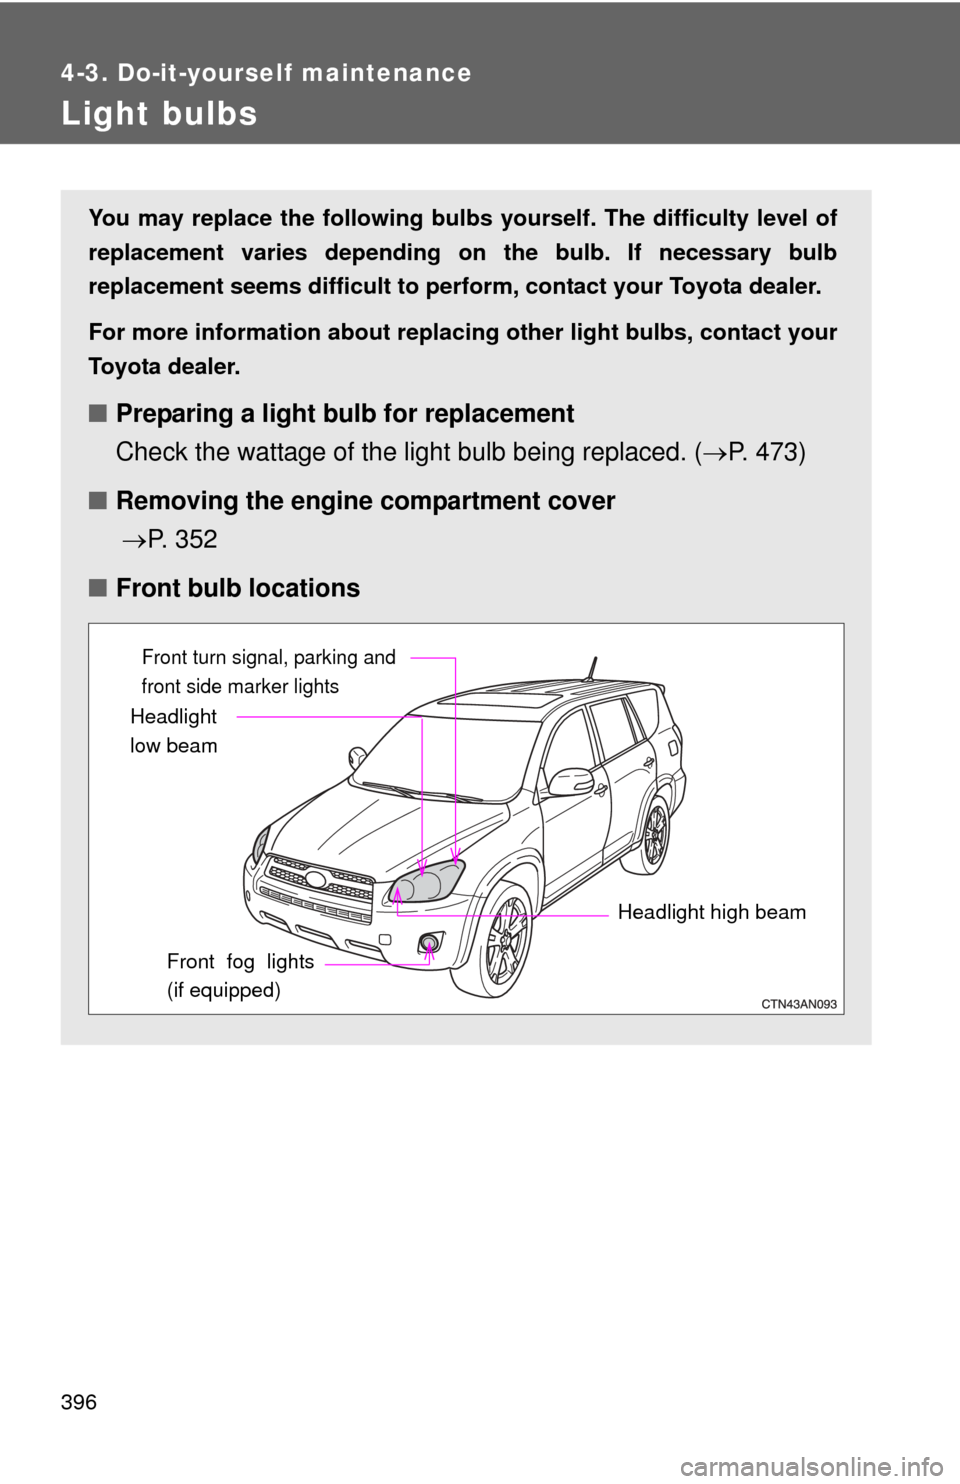 TOYOTA RAV4 2010 XA30 / 3.G Owners Manual 396
4-3. Do-it-yourself maintenance
Light bulbs
You may replace the following bulbs yourself. The difficulty level of
replacement varies depending on the bulb. If necessary bulb
replacement seems diff